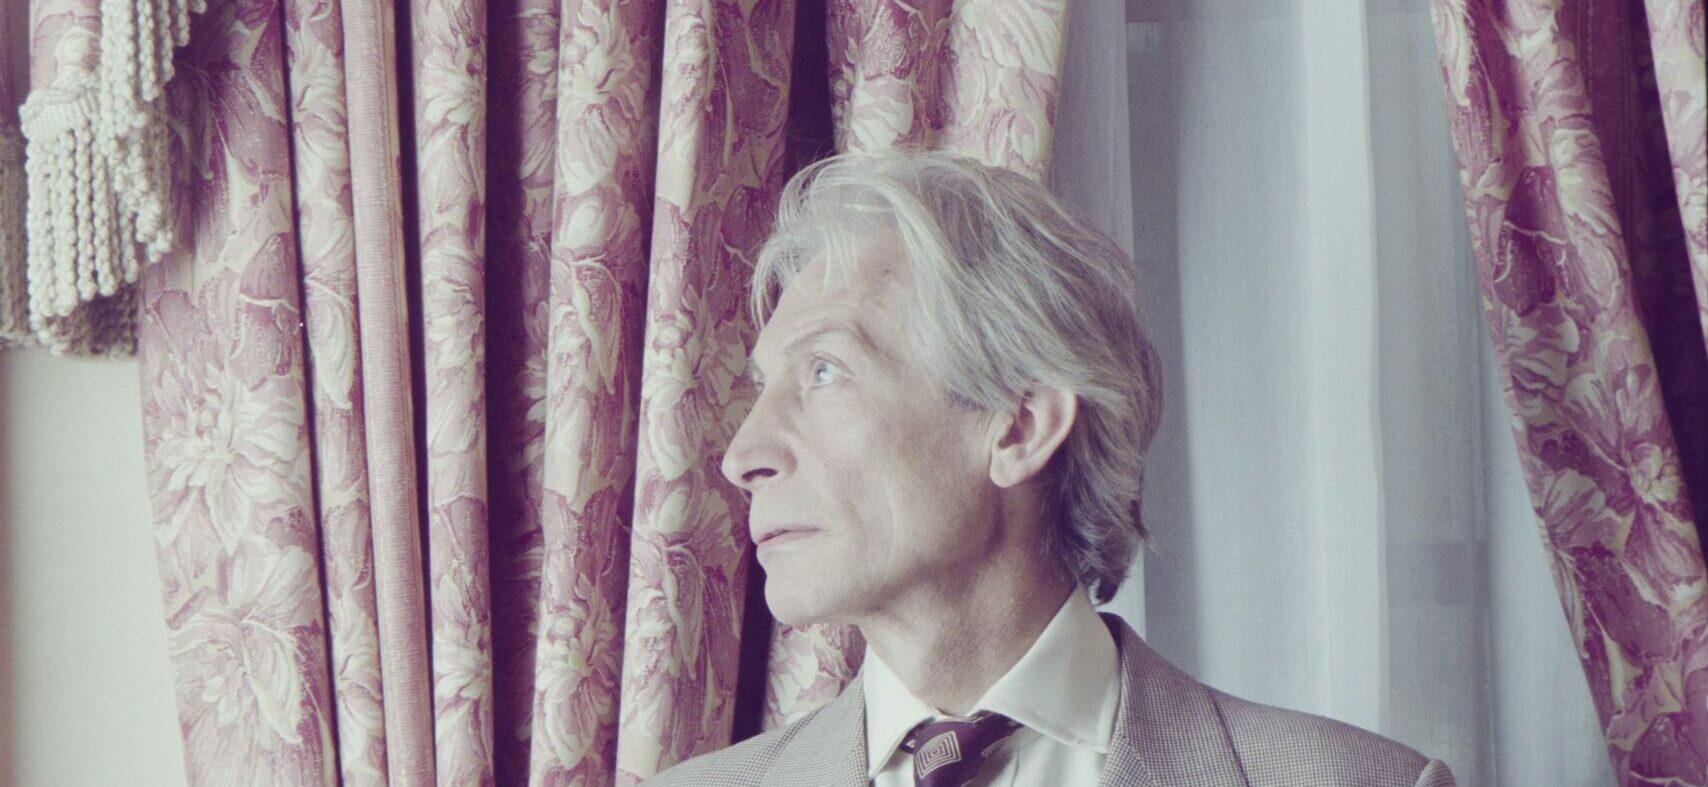 Charlie Watts returns to jazz his first love with a fine new album